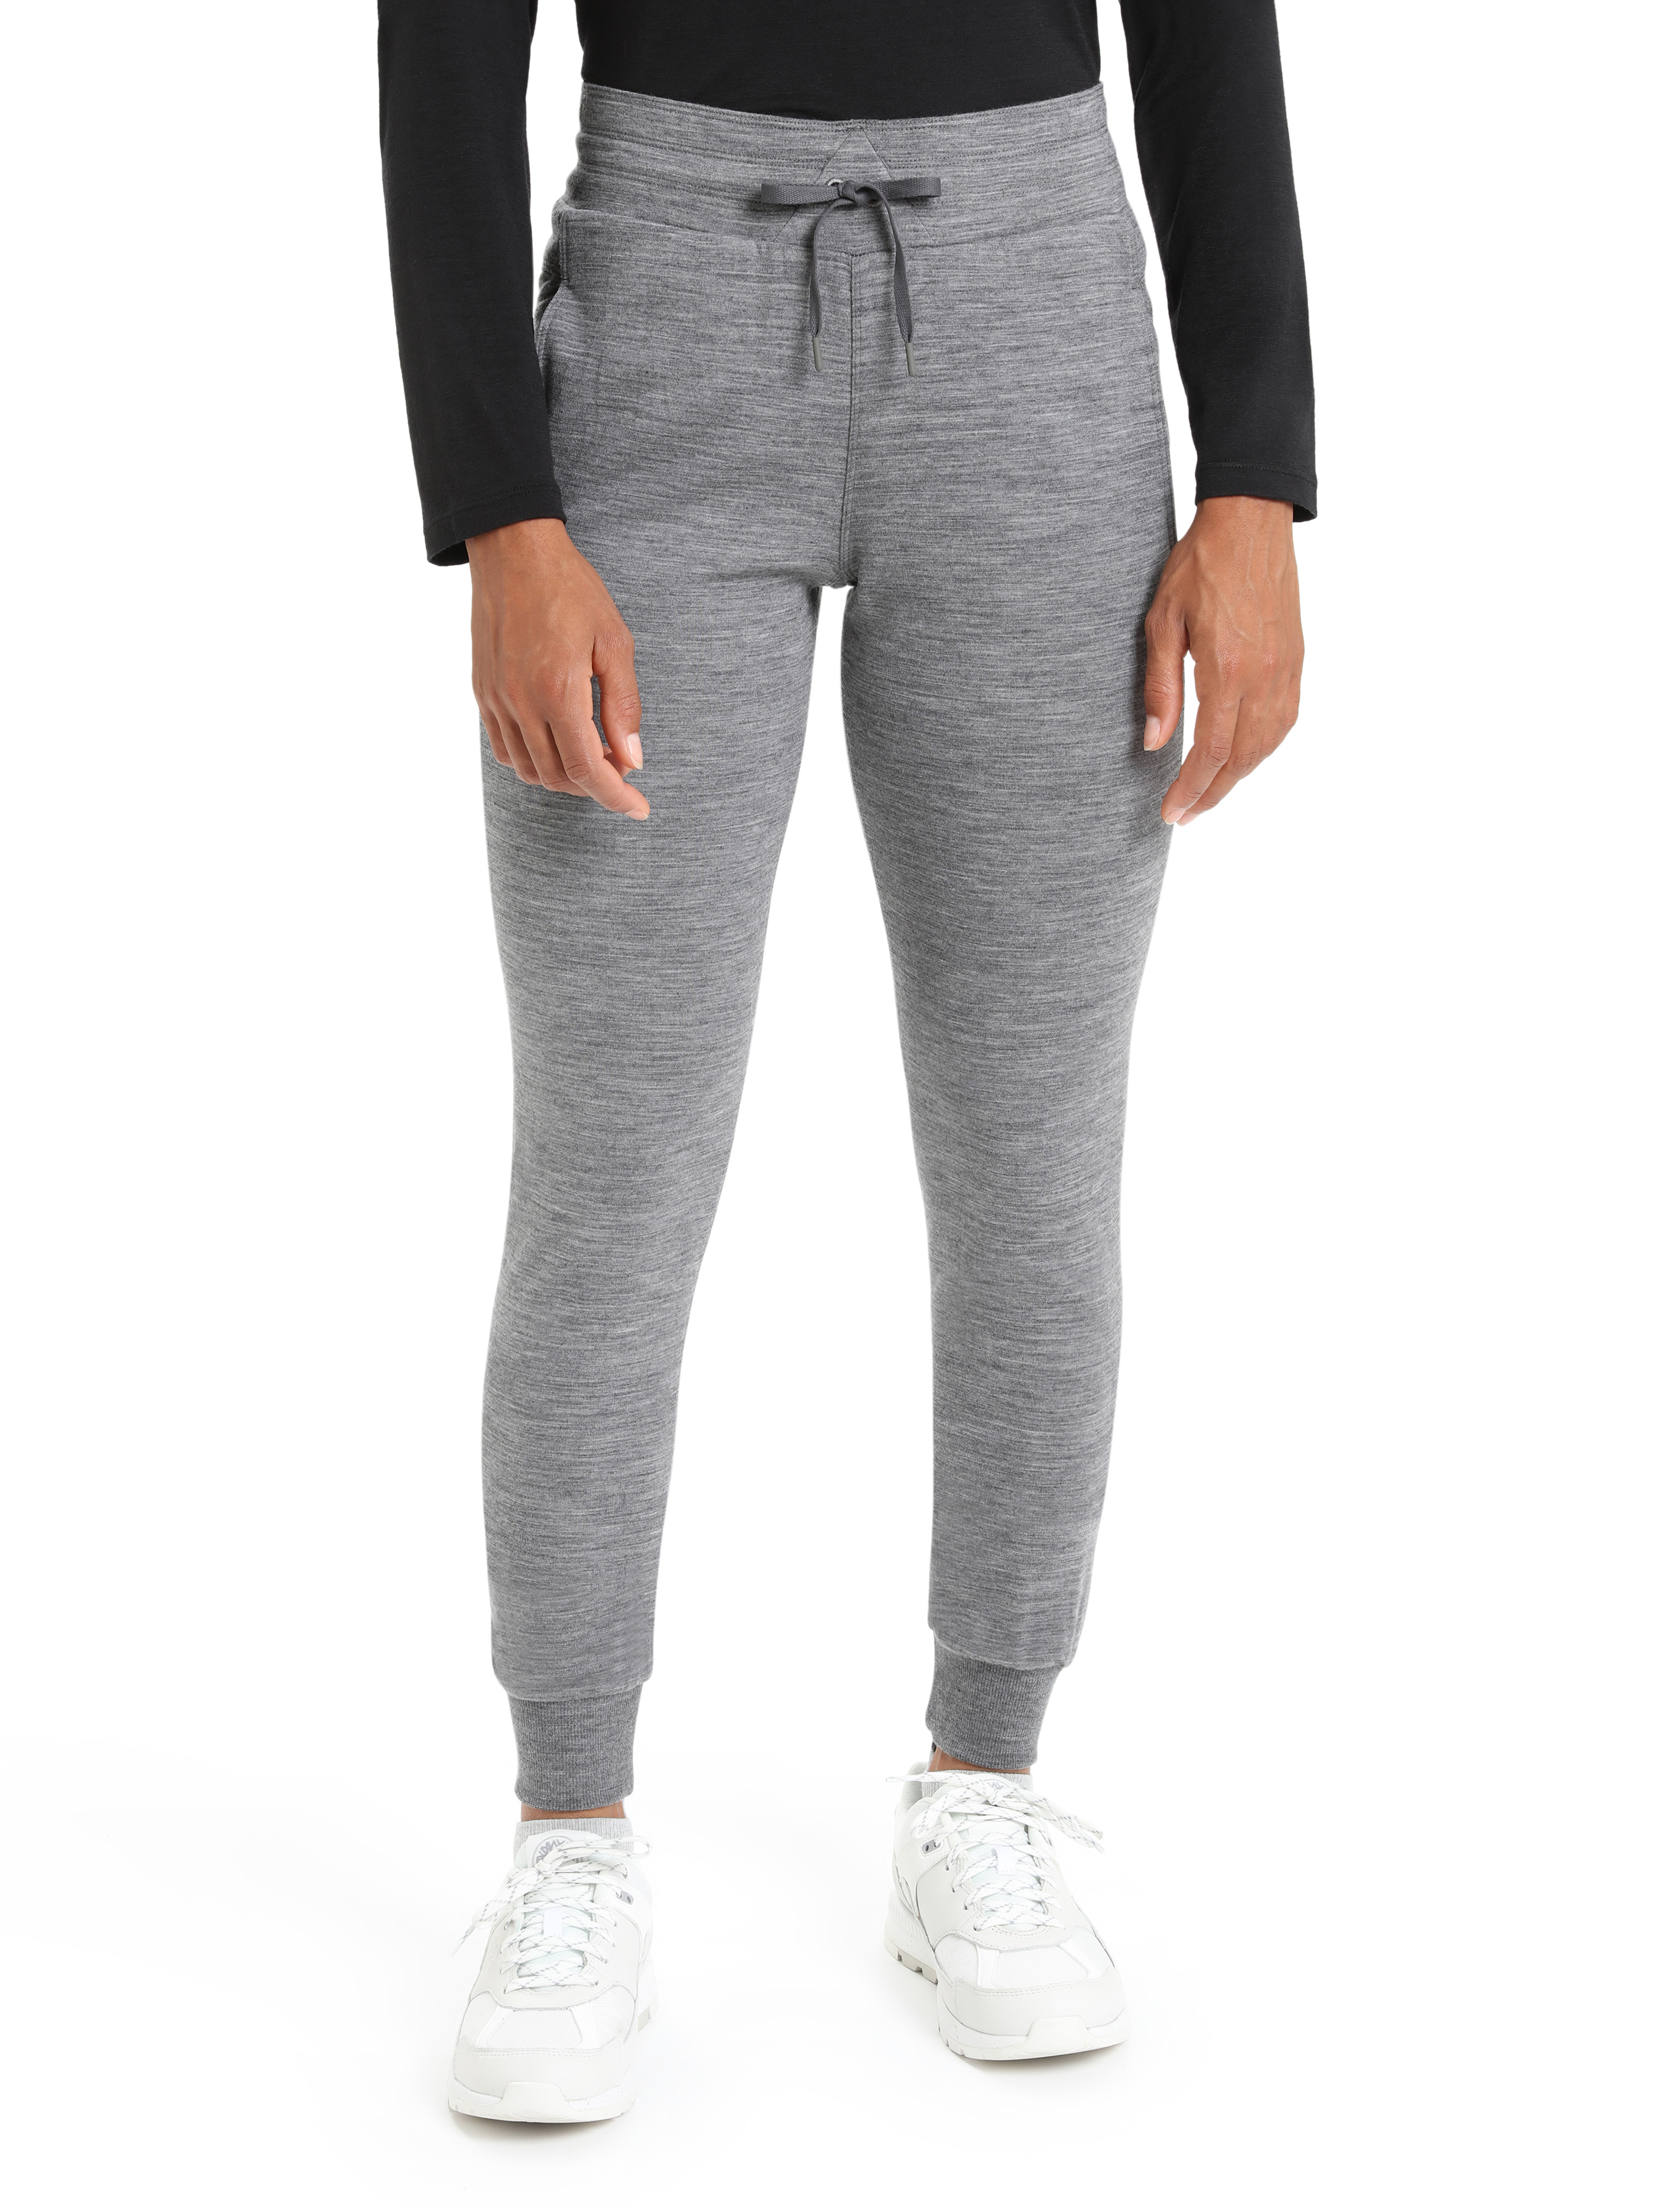 Grey Soft Touch Jogger Trousers Online Shopping